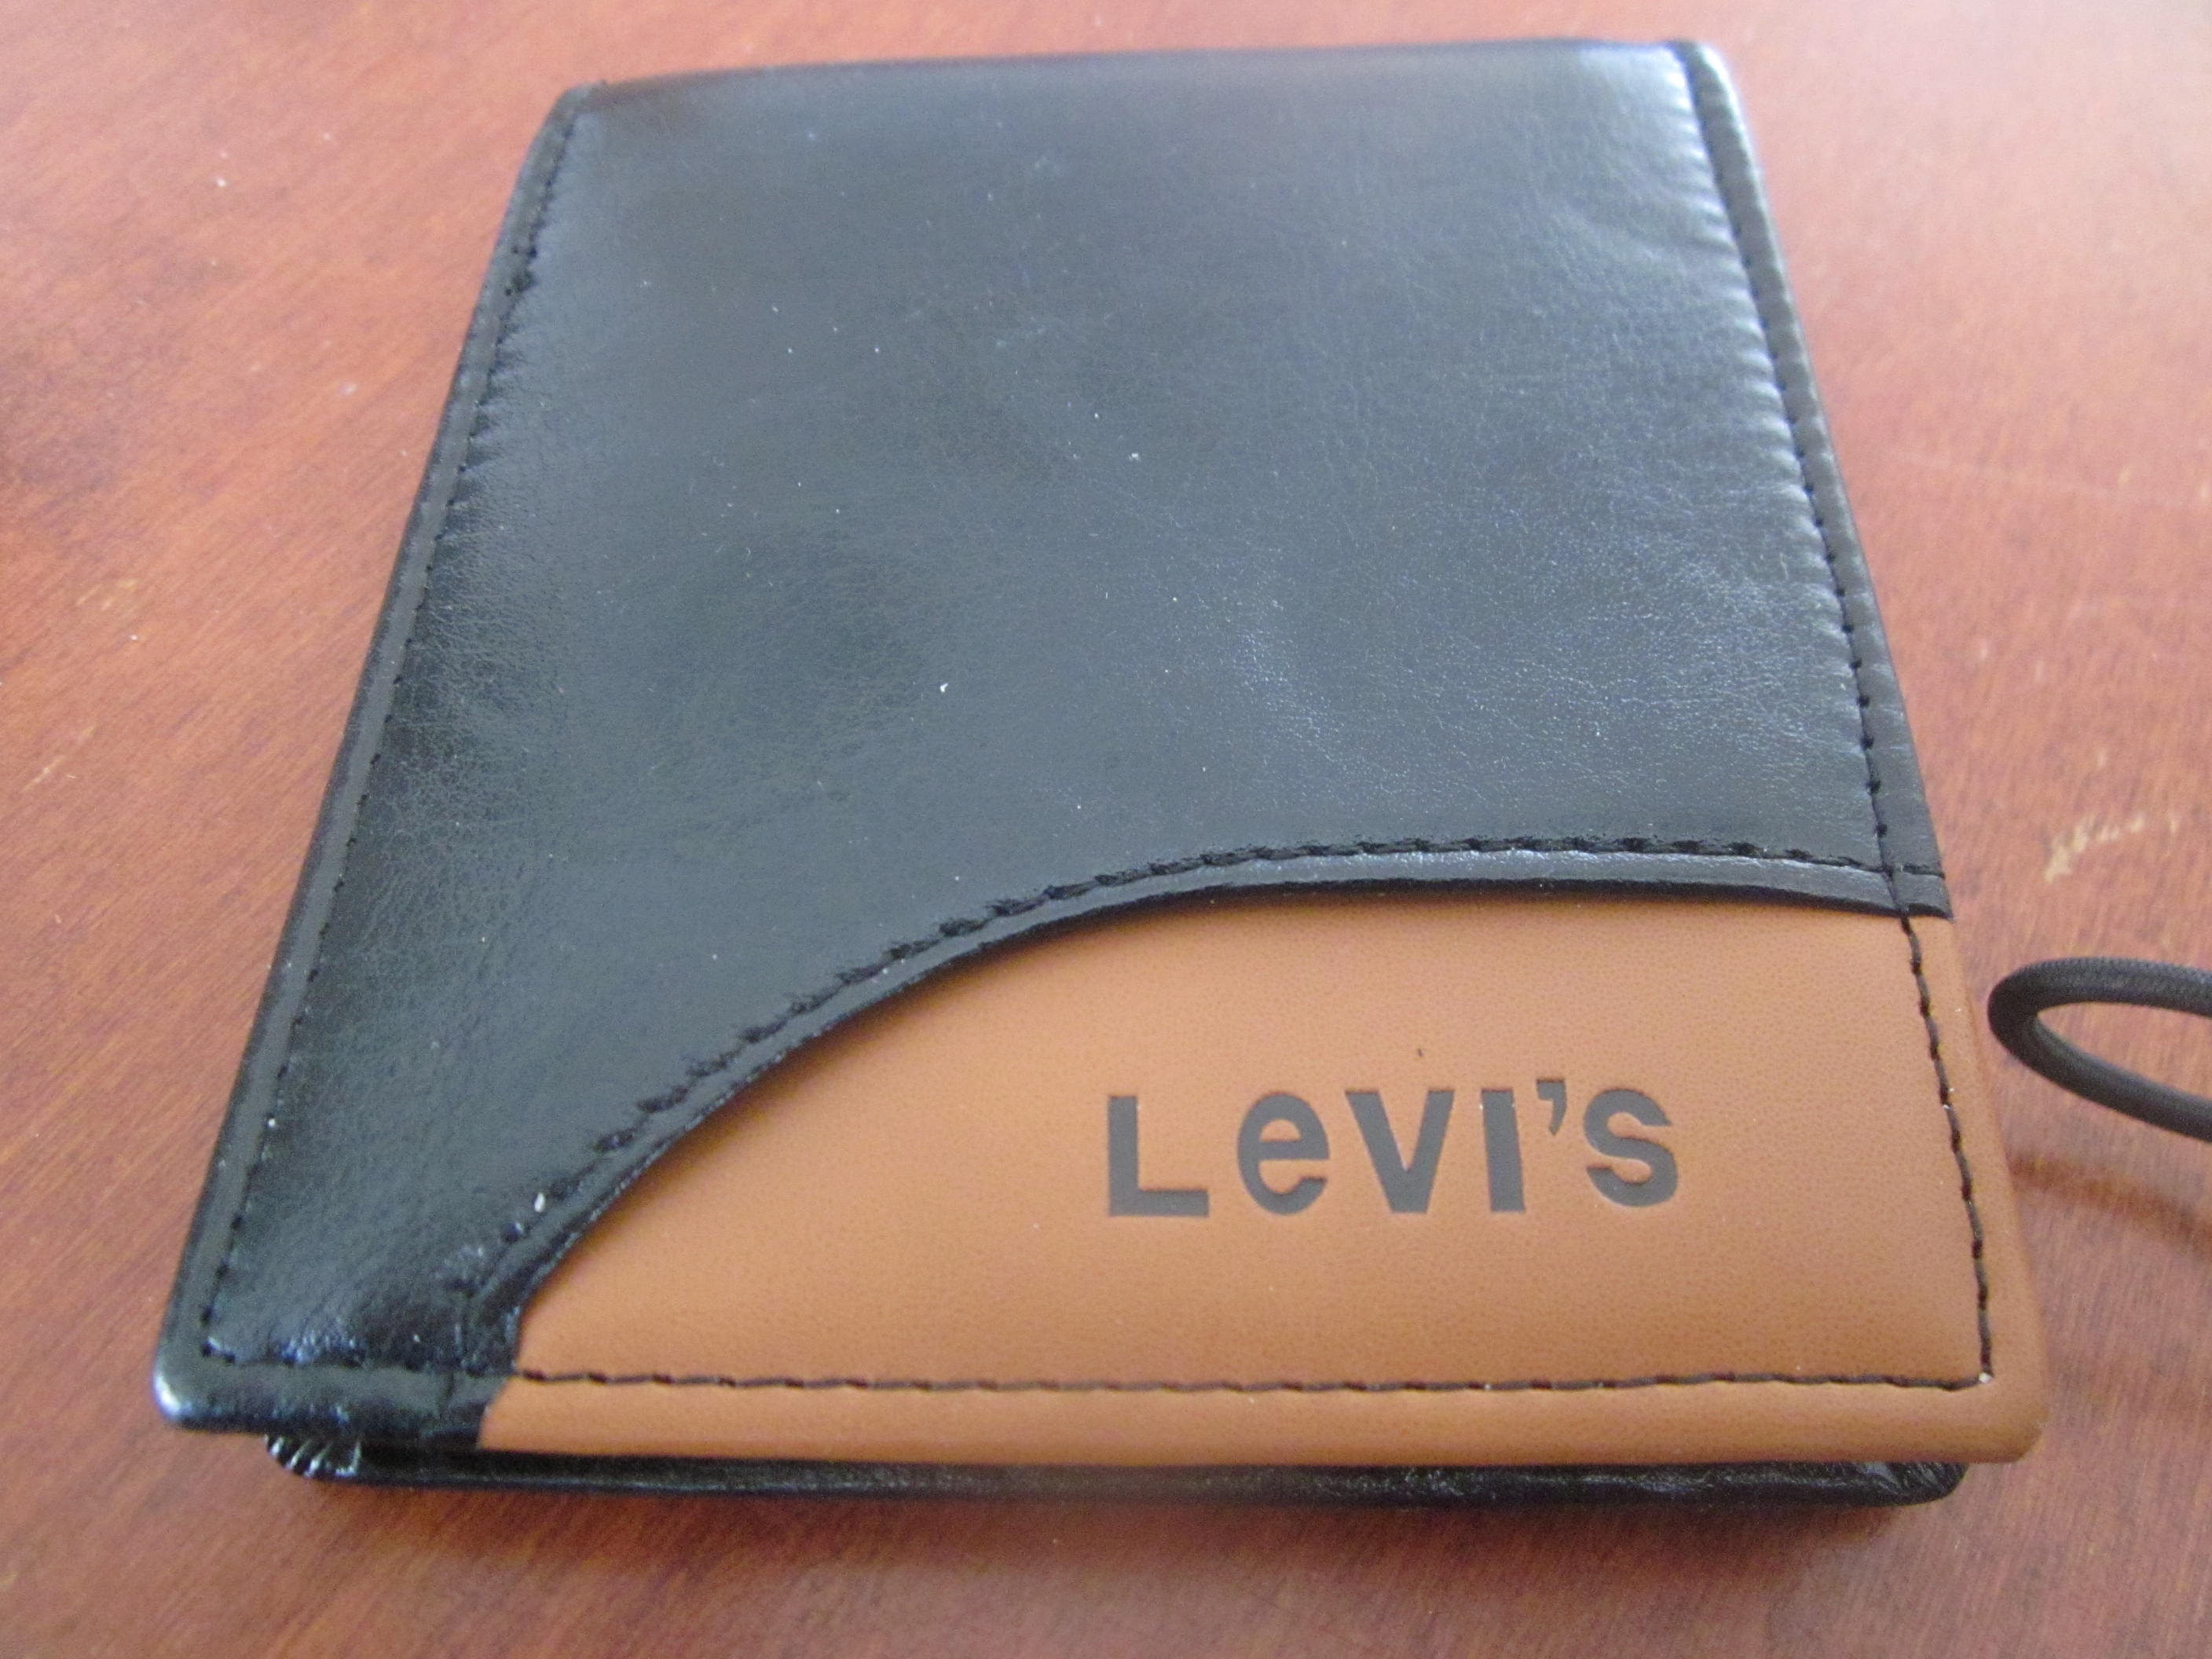 Genuine Leather Wallet From Levi's - Etsy New Zealand